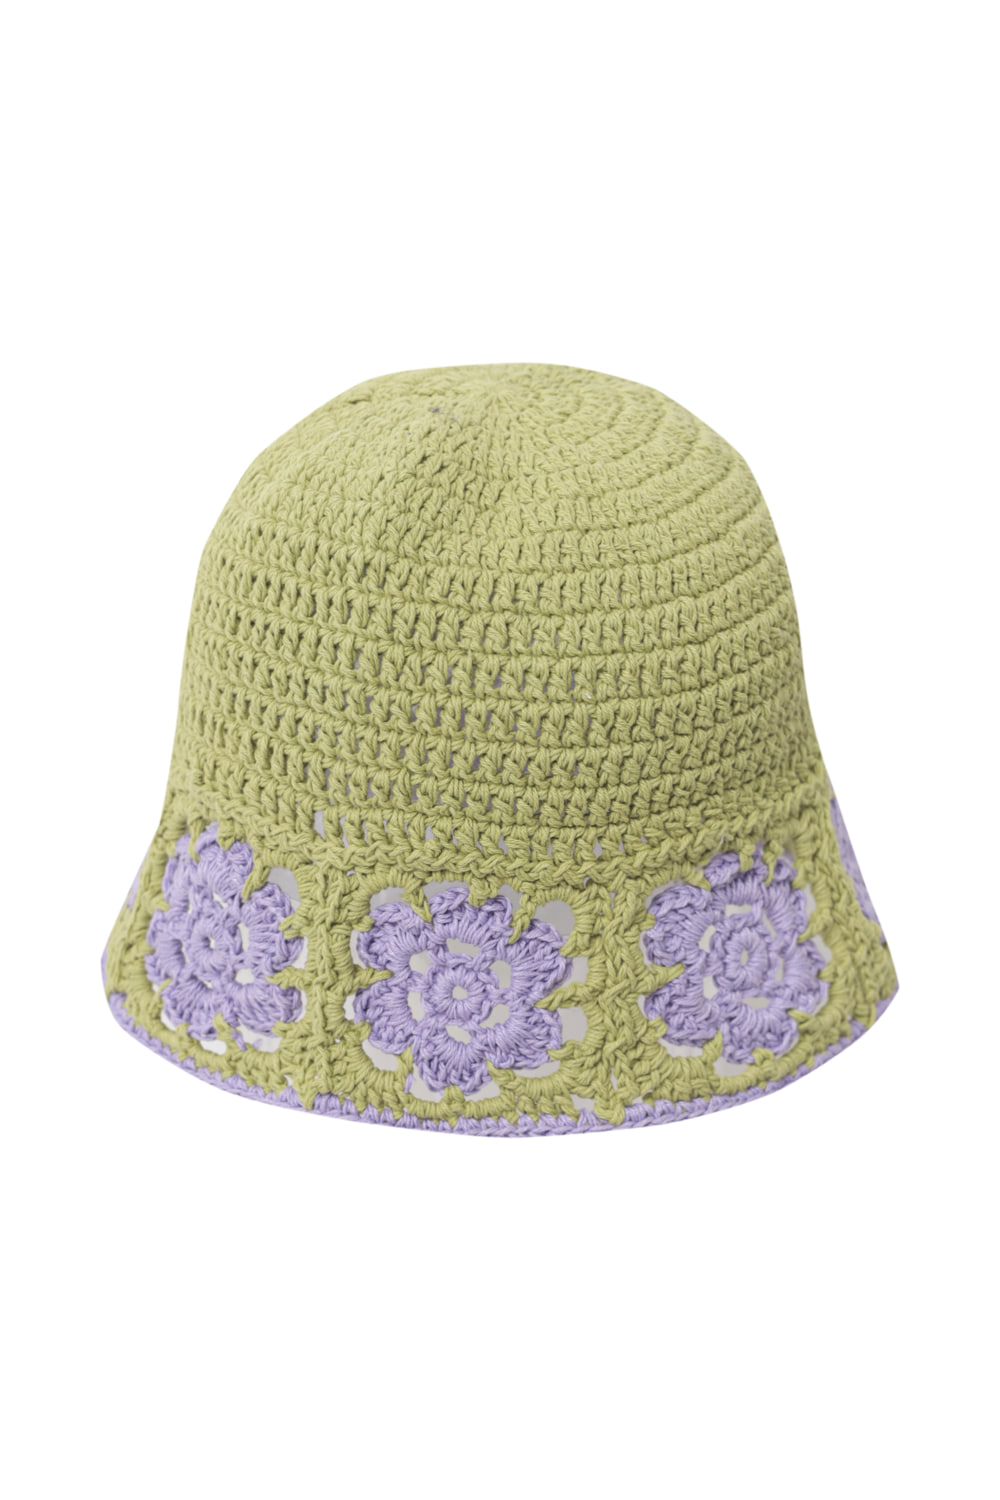 Aria Hand Embroidered Bucket Hat (Olive)